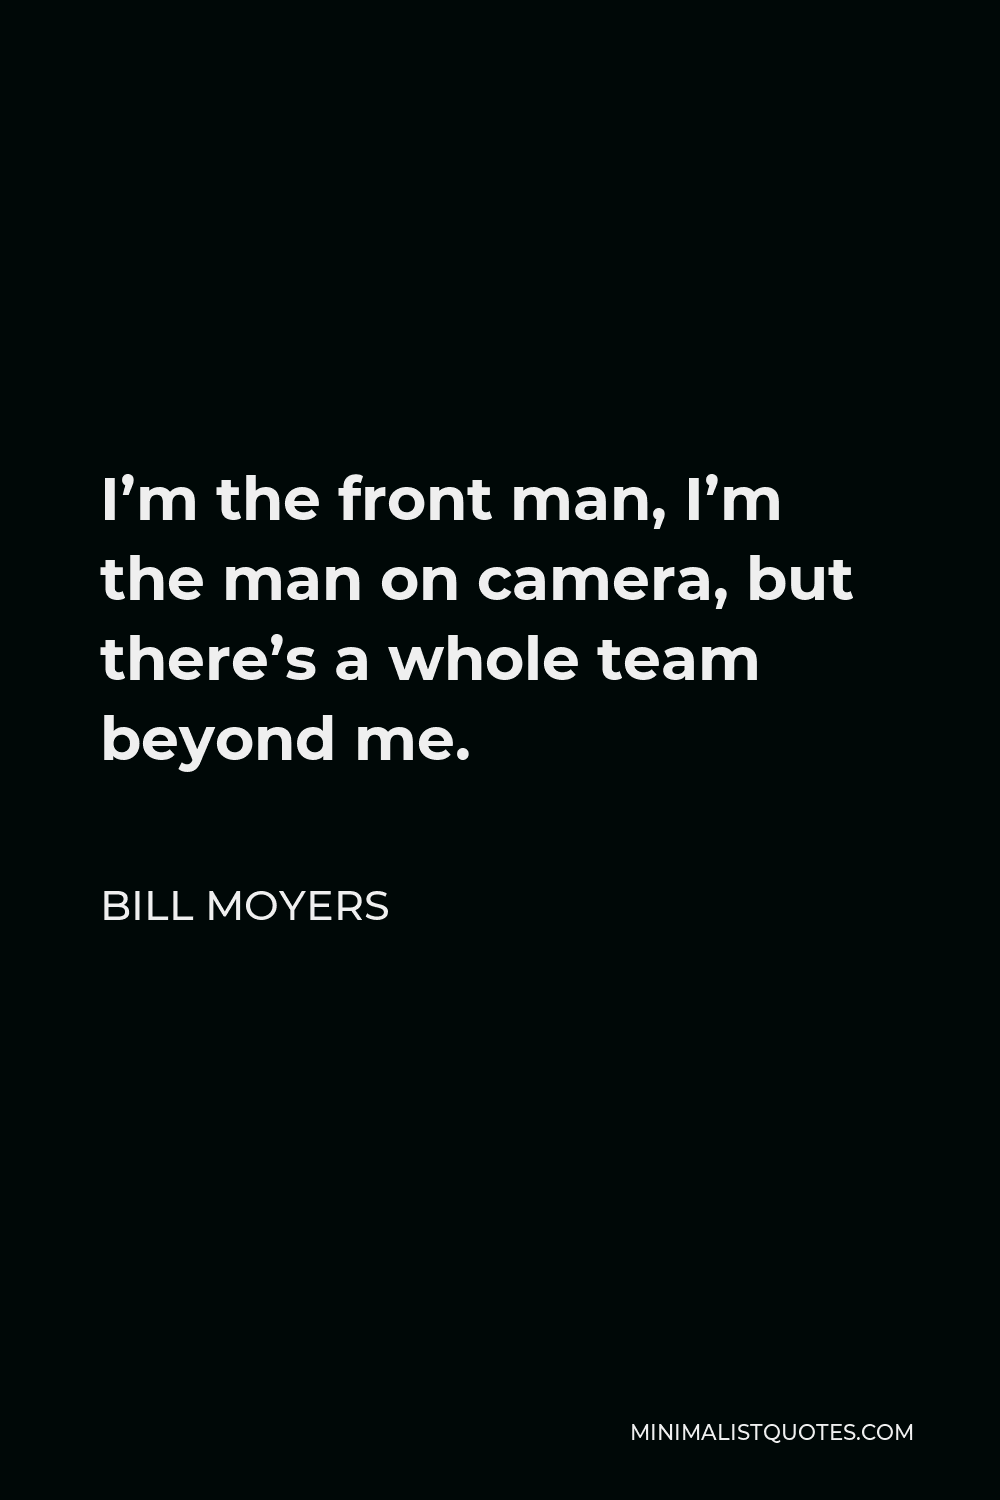 Bill Moyers Quote - I’m the front man, I’m the man on camera, but there’s a whole team beyond me.